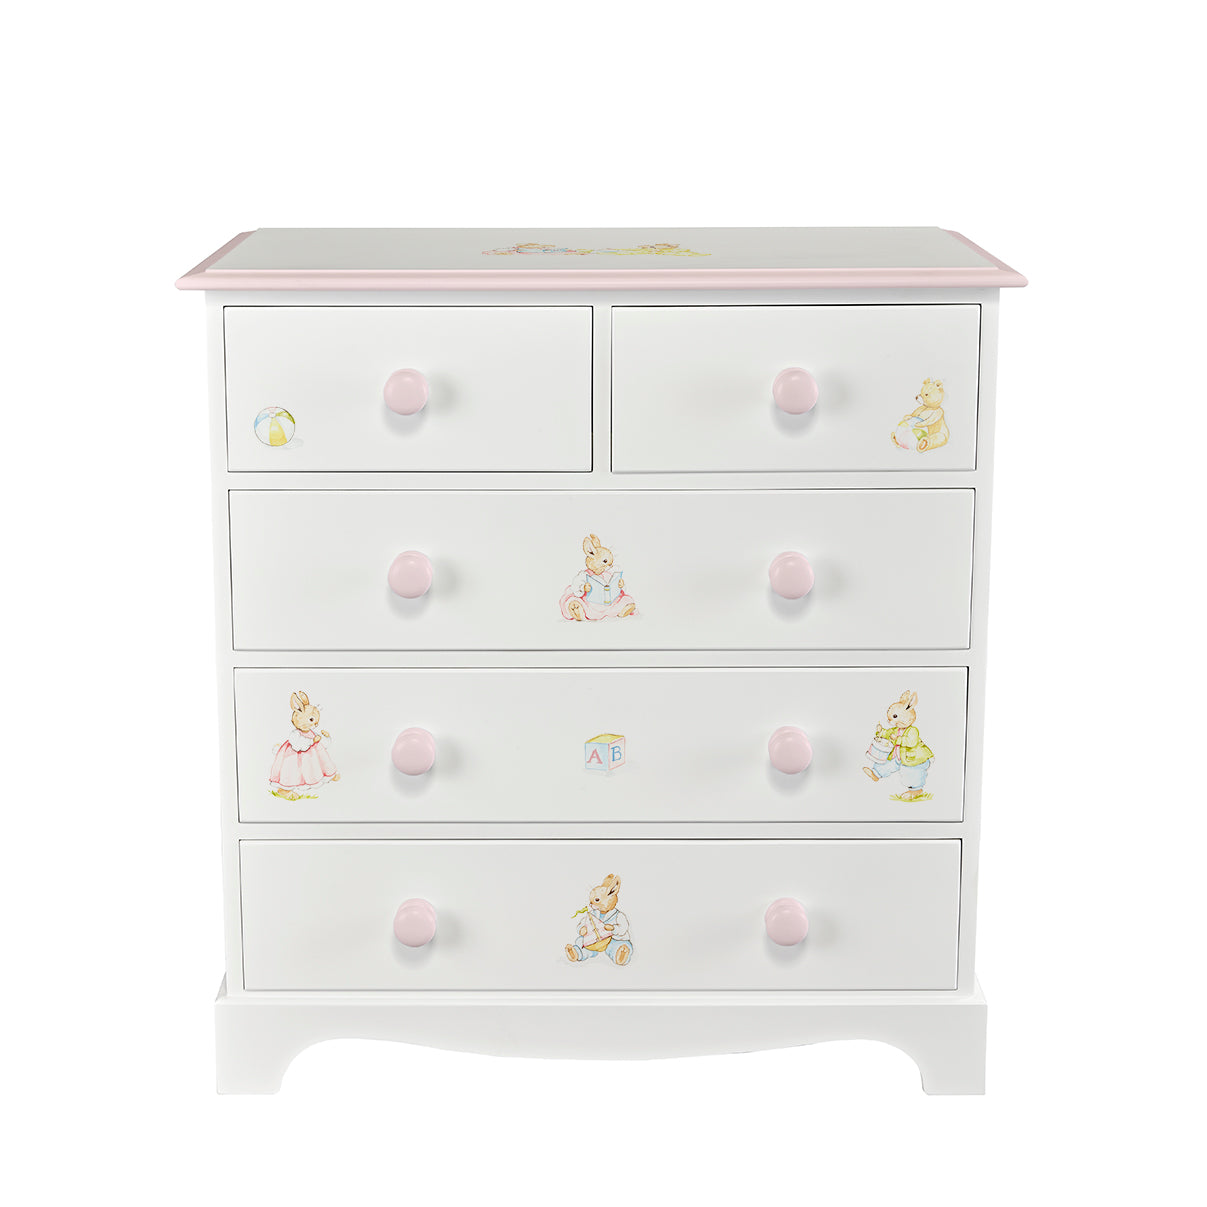 Large Chest of Drawers - Barbara's Bunnies with Dragons Pink Trim